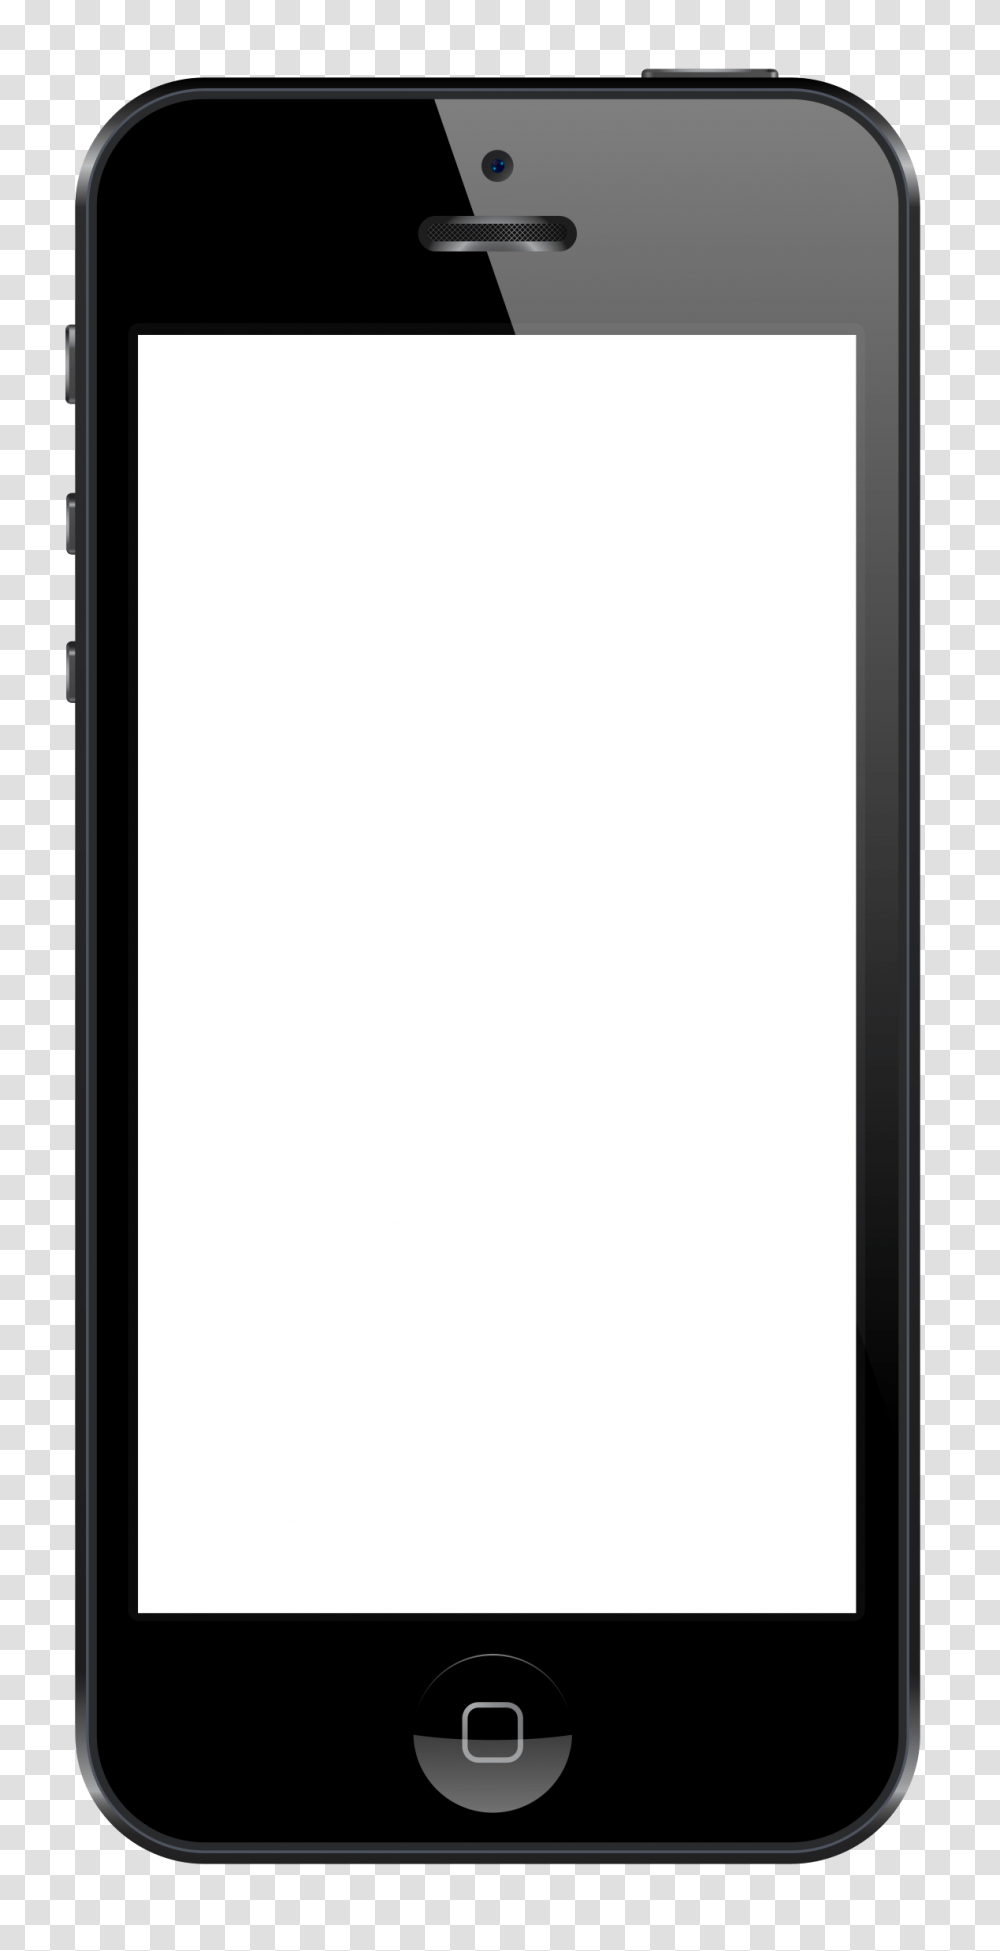 Iphone 6 No Background & Clipart Free Iphone 8 Template, Electronics, Mobile Phone, Cell Phone Transparent Png